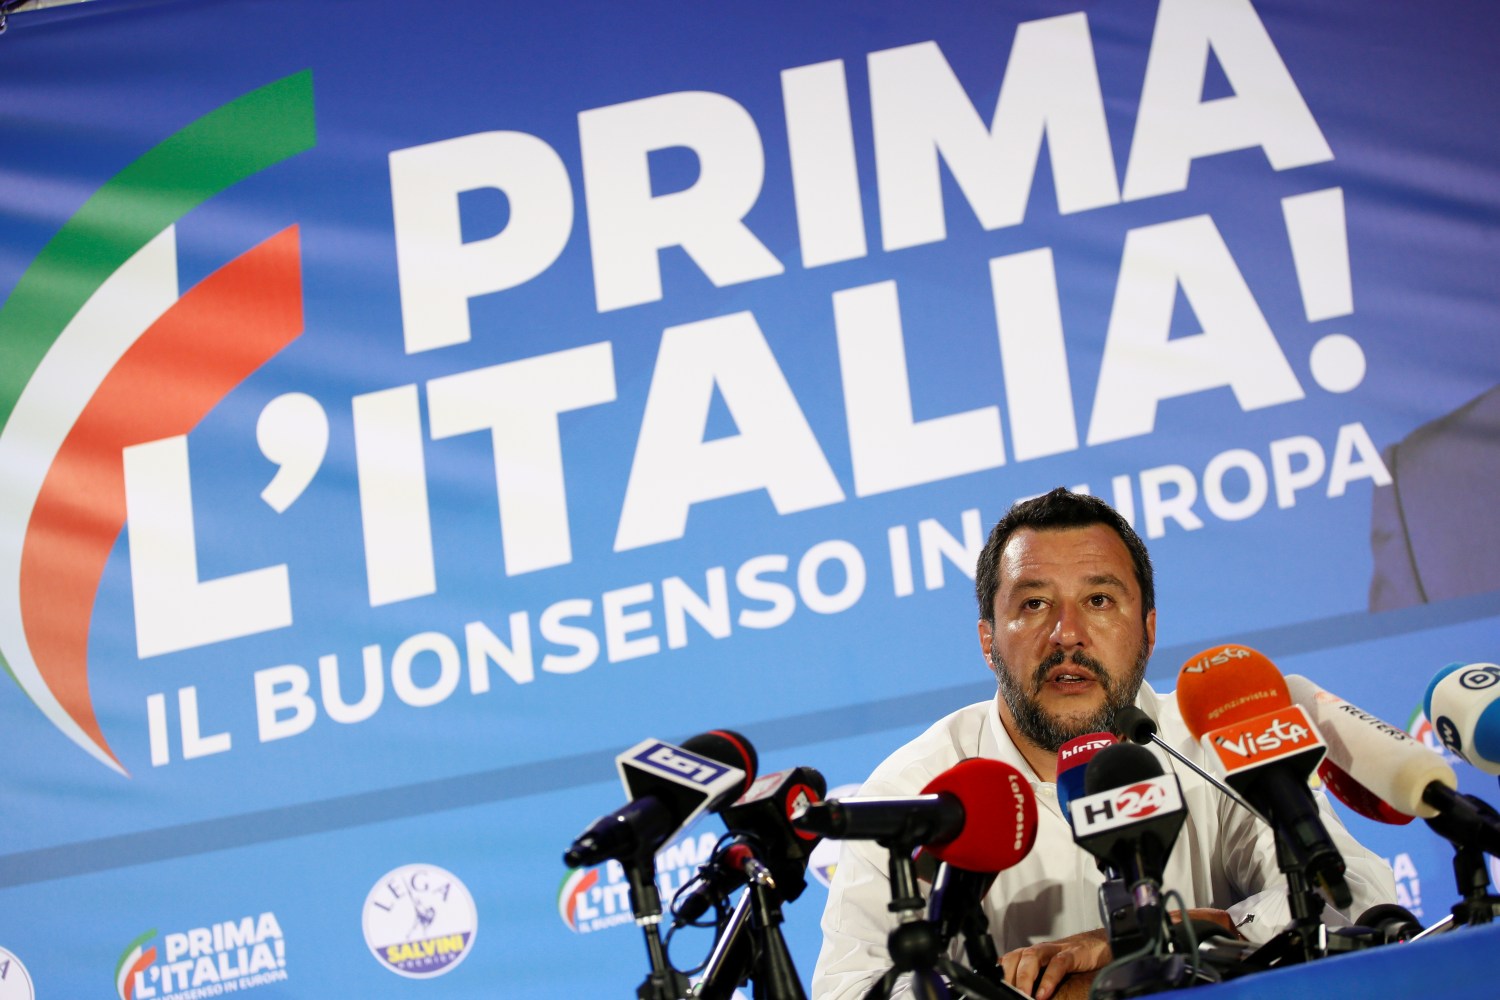 Italian Deputy Prime Minister and leader of far-right League party Matteo Salvini speaks during his European Parliament election night event in Milan, Italy, May 27, 2019. REUTERS/Alessandro Garofalo - RC1CD593CE00